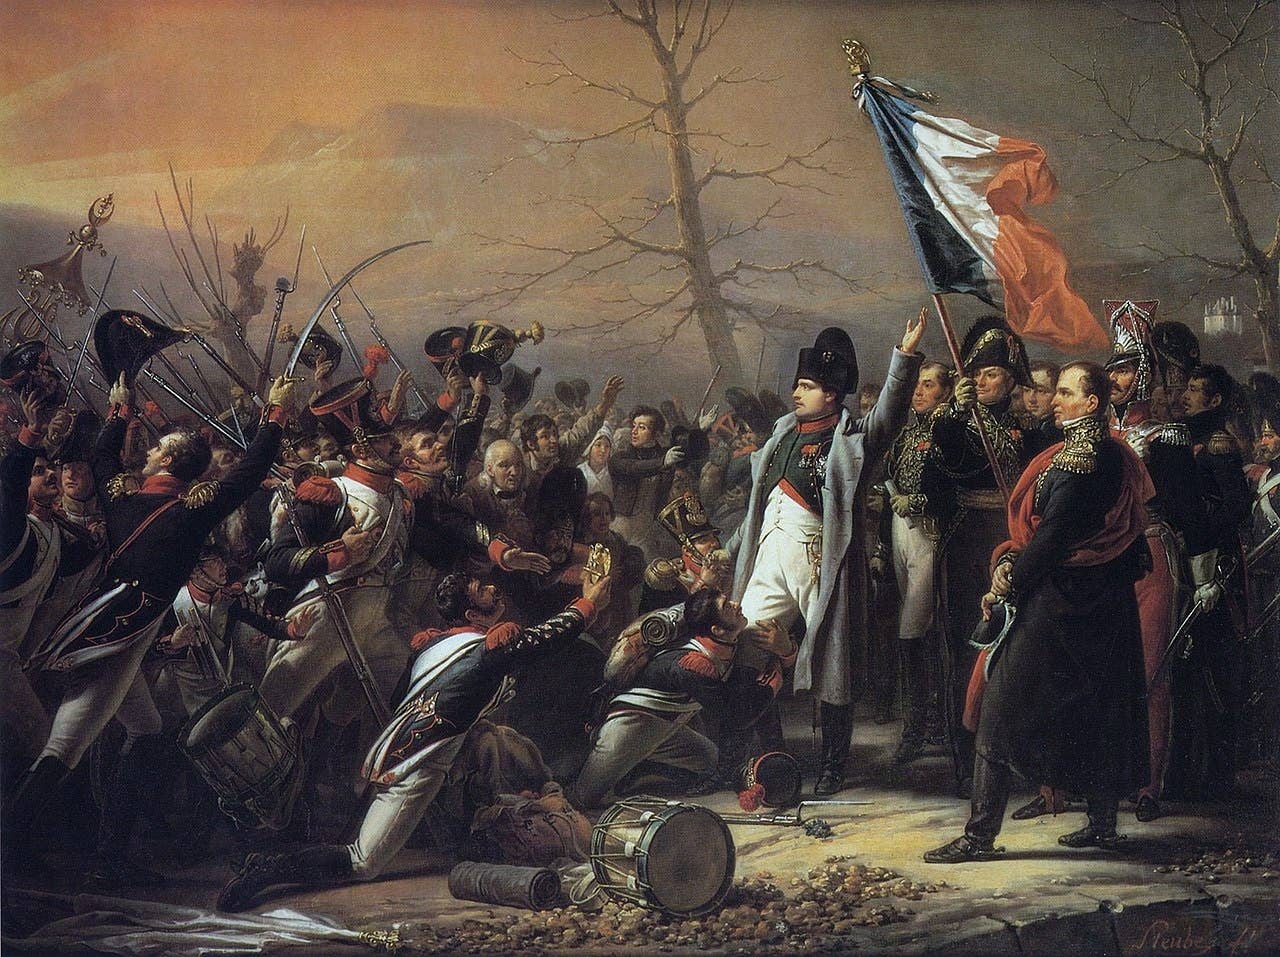 Napoleon greeted by the 5th Regiment at Grenoble, 7 March 1815, after his escape from Elba. (Wikimedia Commons)